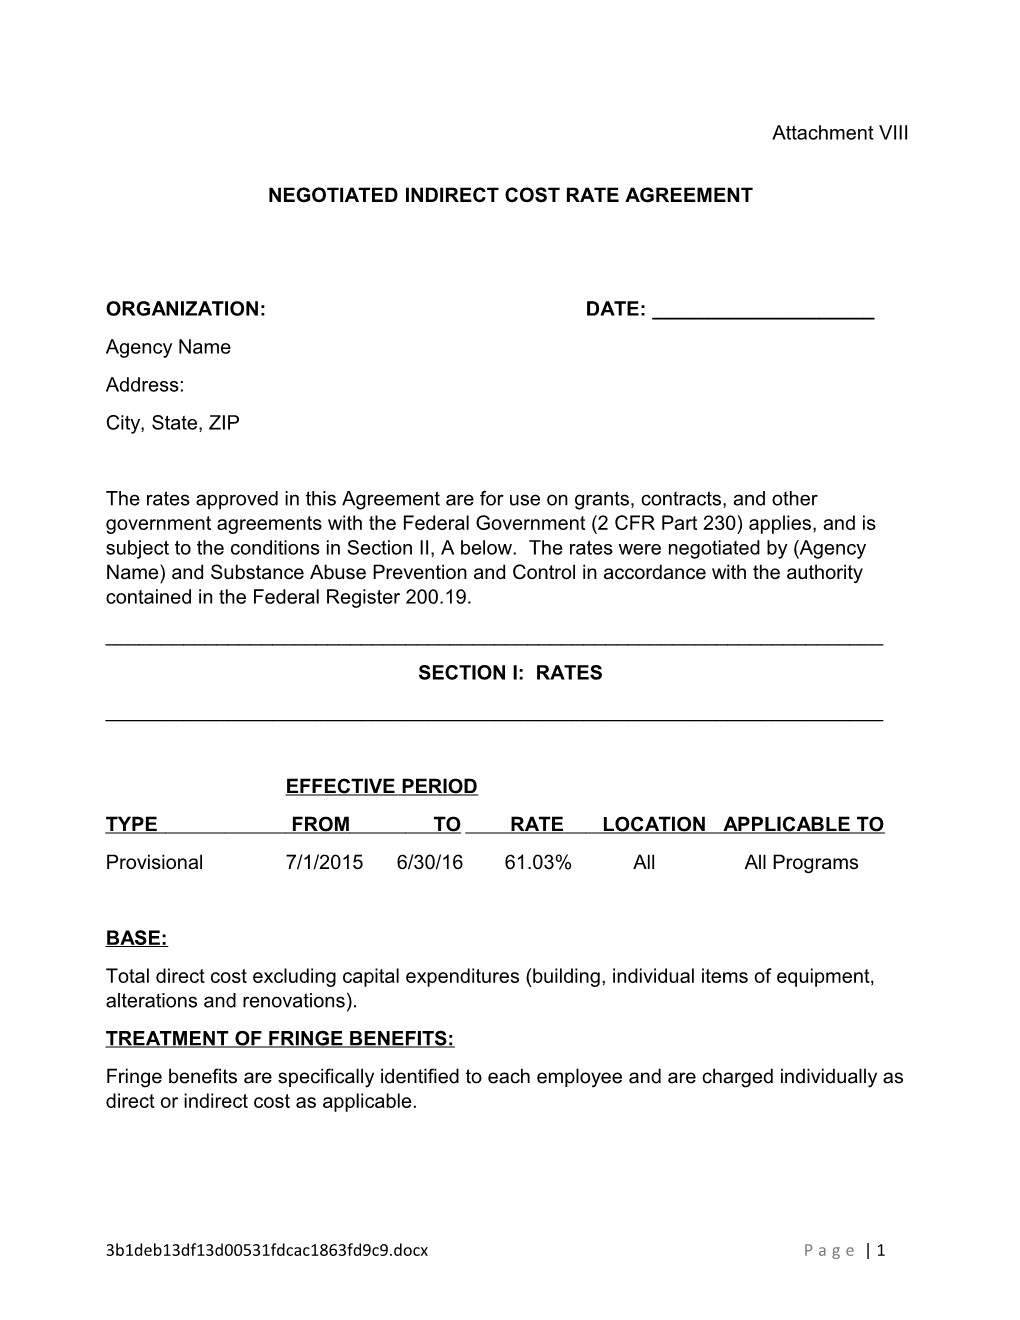 Negotiated Indirect Cost Rate Agreement